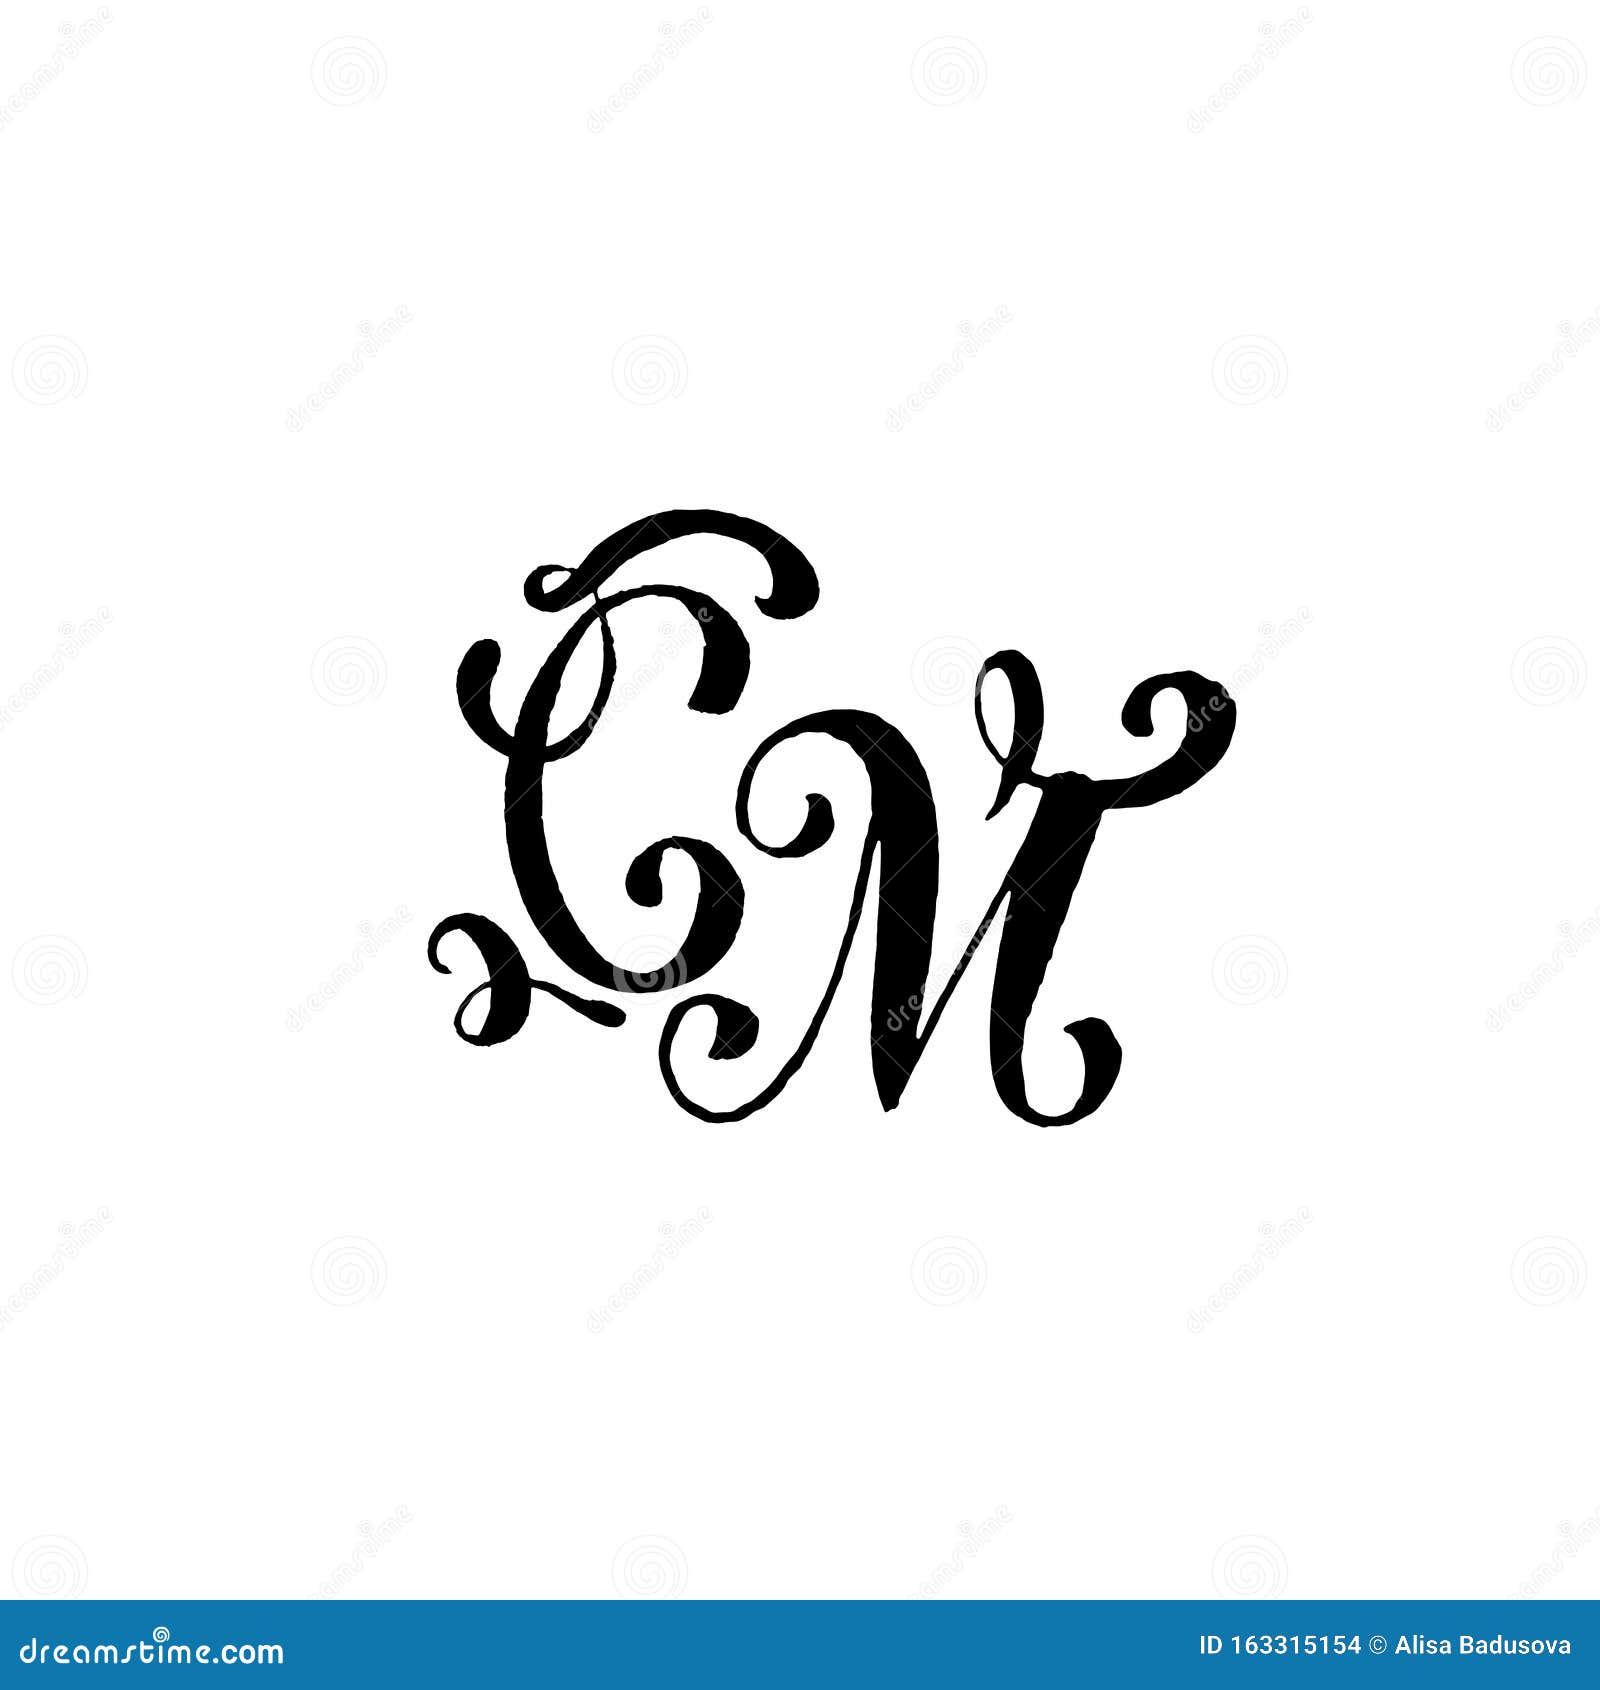 Hand Drawn Letters C And M For Wedding Logo Monogram Design On White Background Stock Vector Illustration Of Elegant Decoration 163315154,Top 10 Best Interior Designers In India